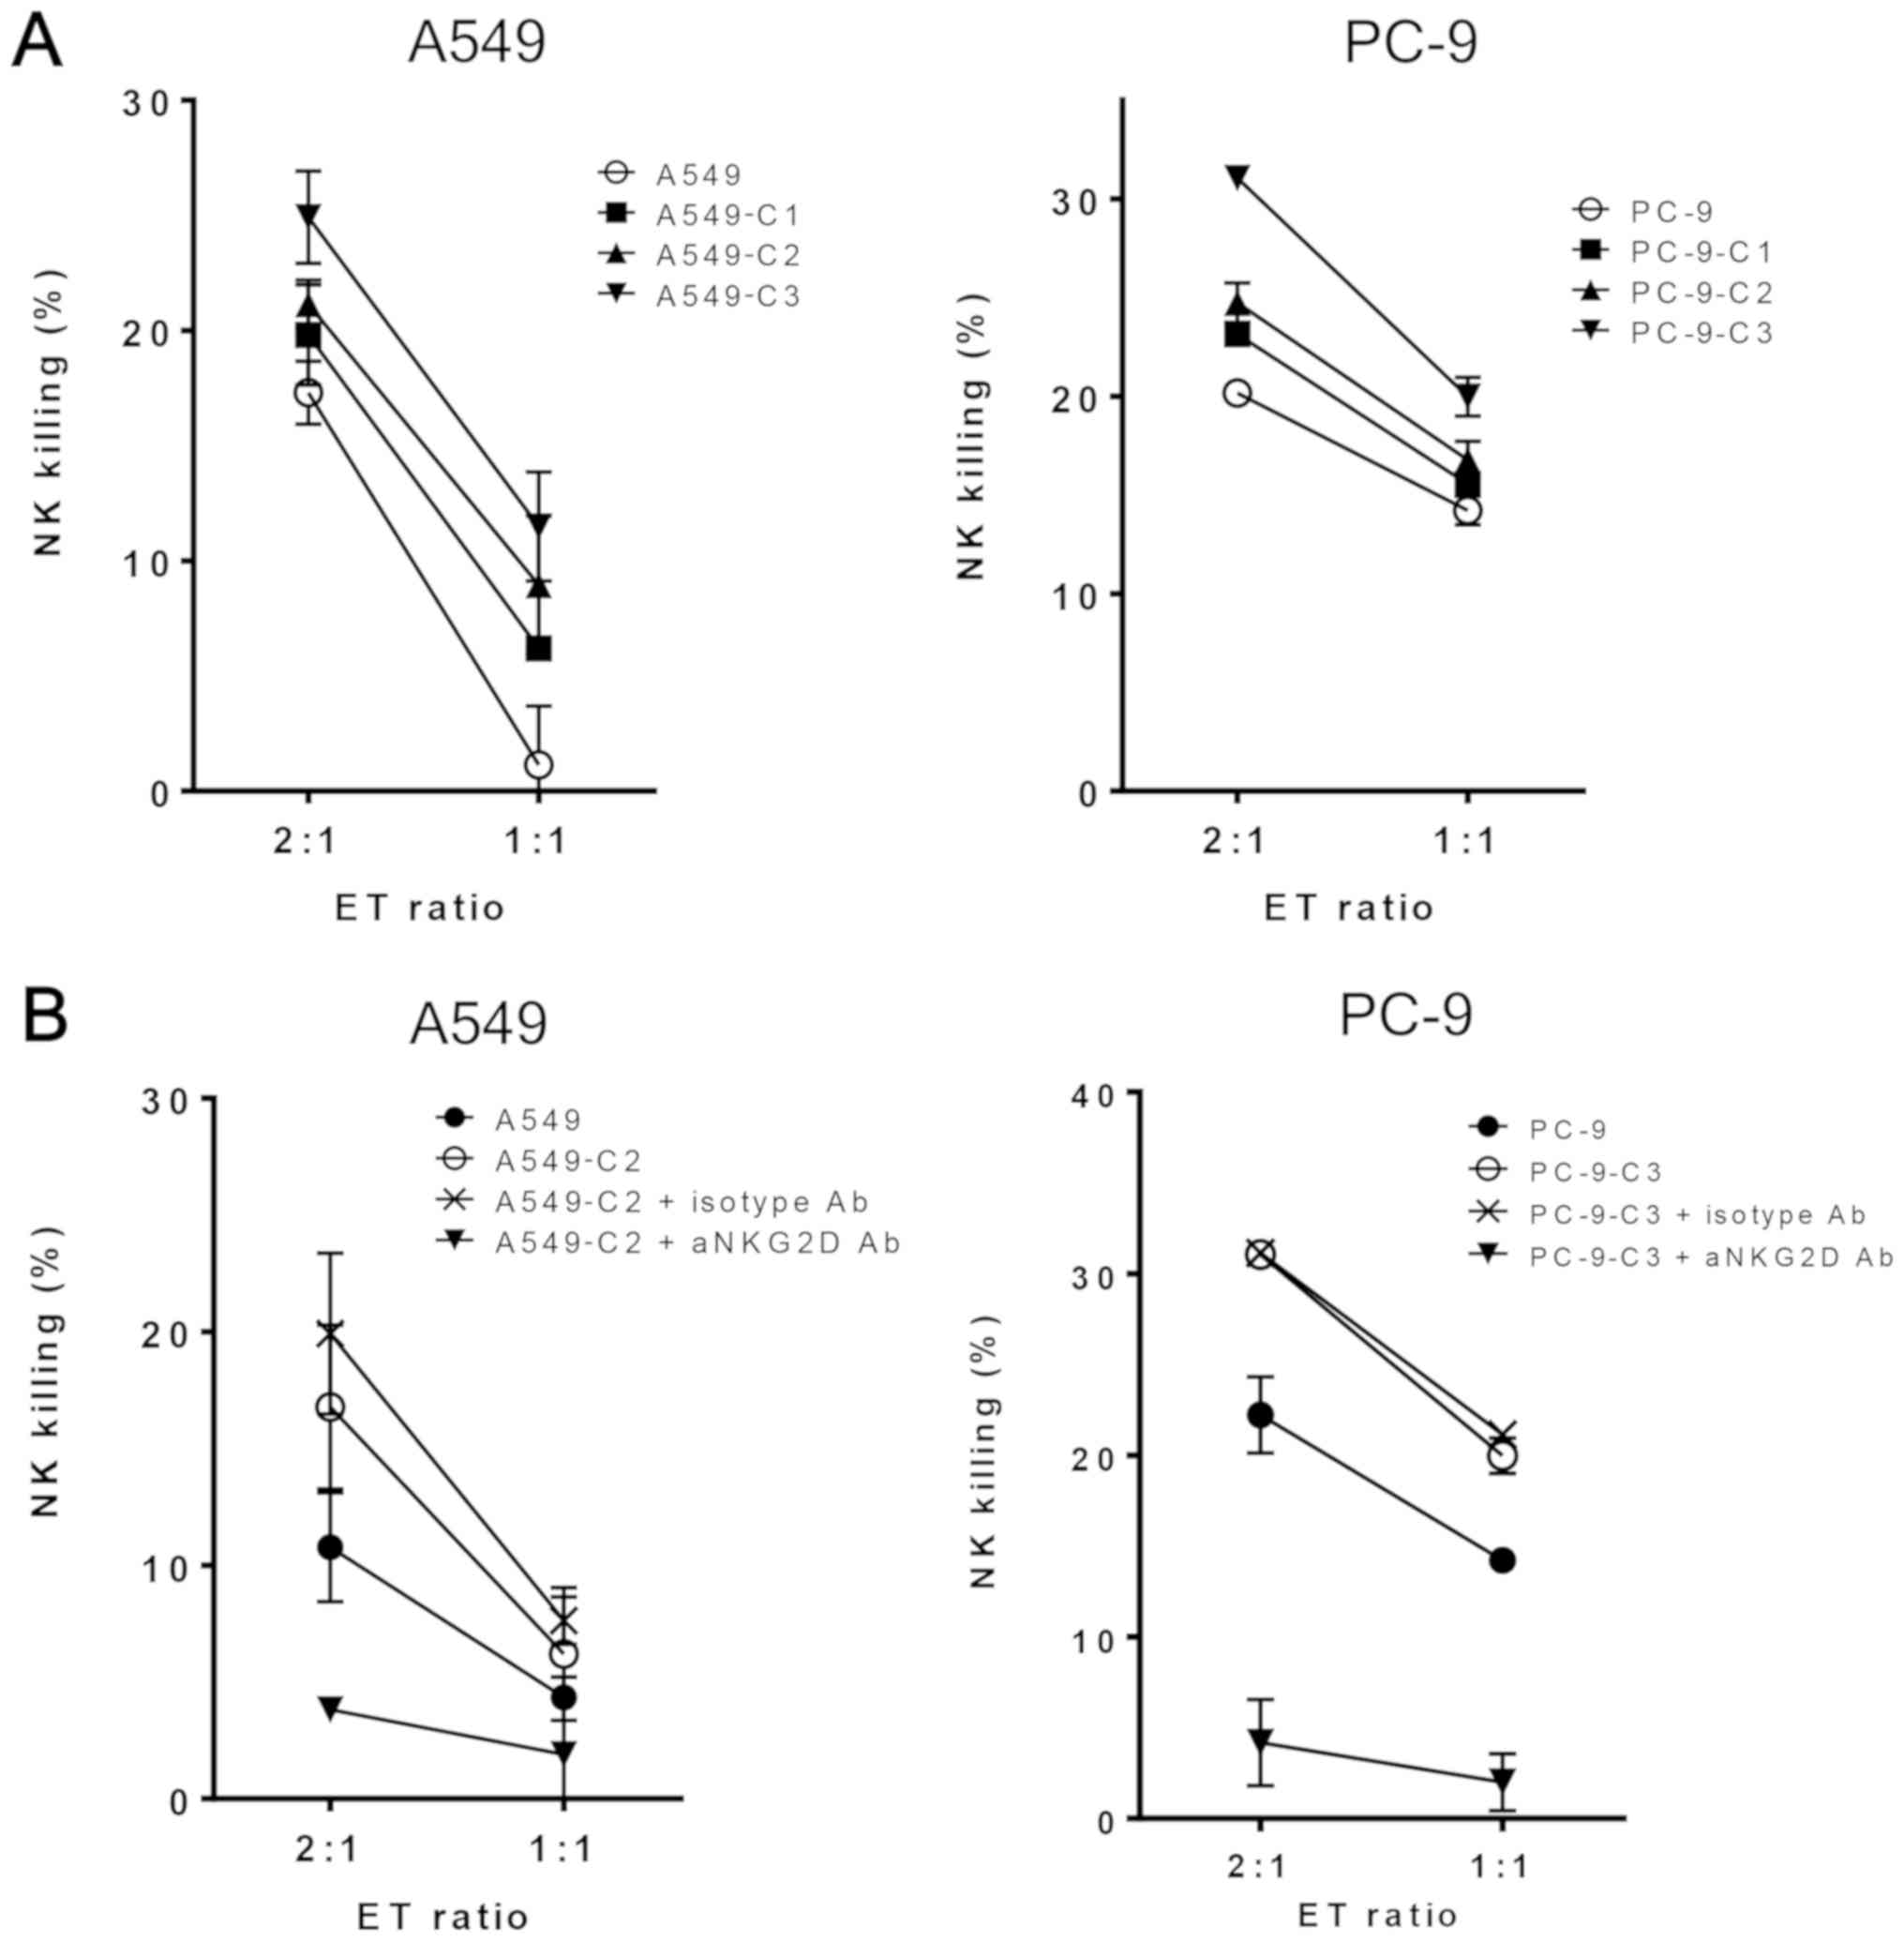 Effect Of Platinum Based Chemotherapy On The Expression Of Natural Killer Group 2 Member D Ligands Programmed Cell Death 1 Ligand 1 And Hla Class I In Non Small Cell Lung Cancer